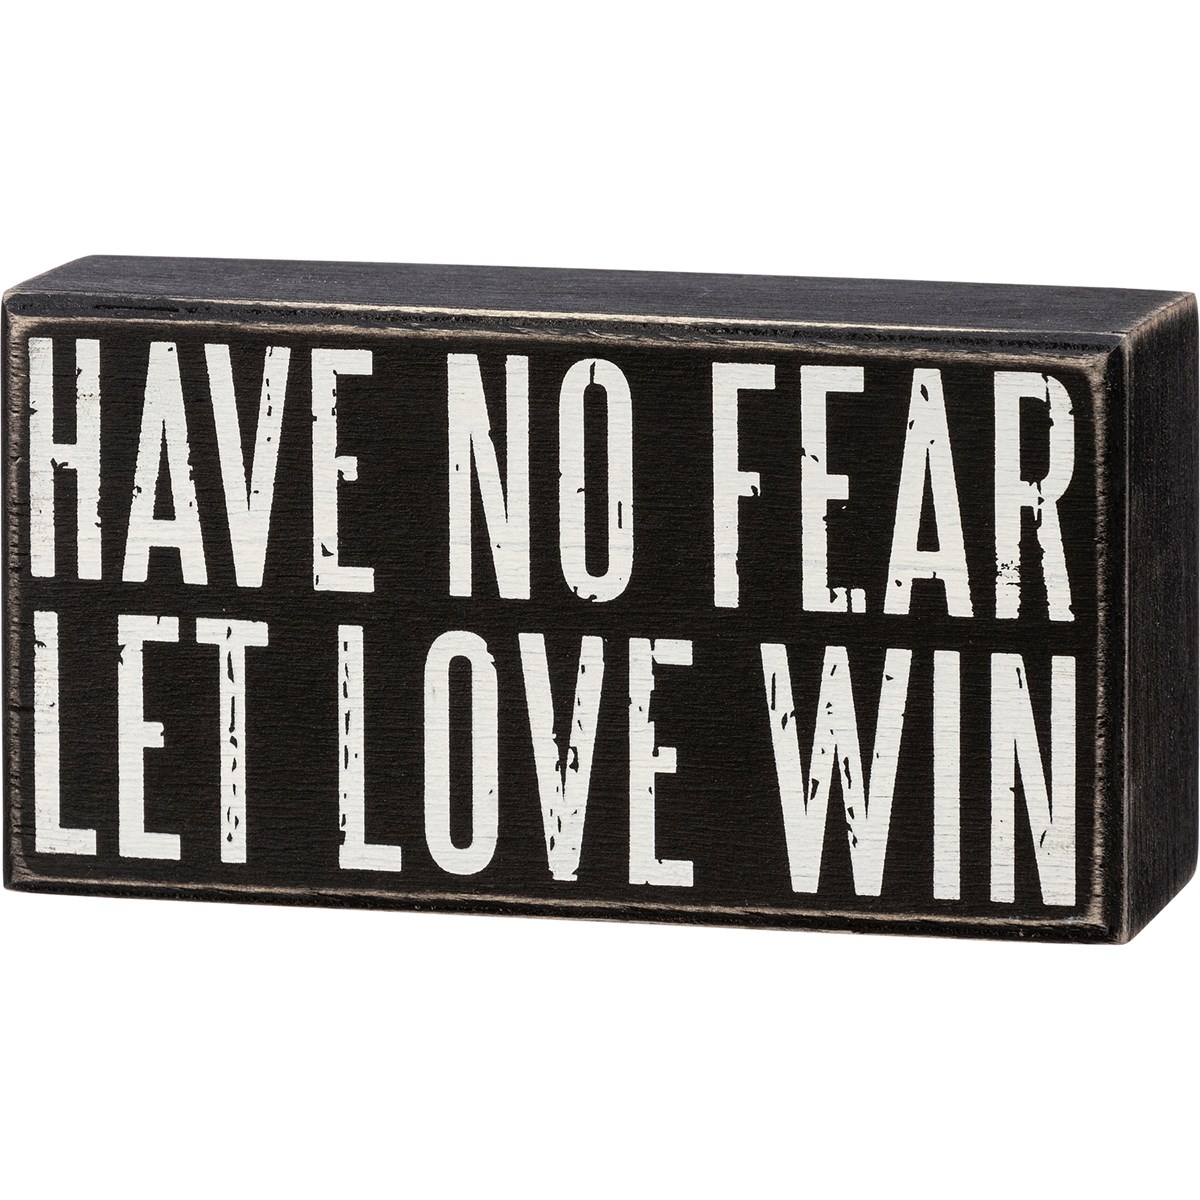 Have No Fear Let Love Win Box Sign - Wood